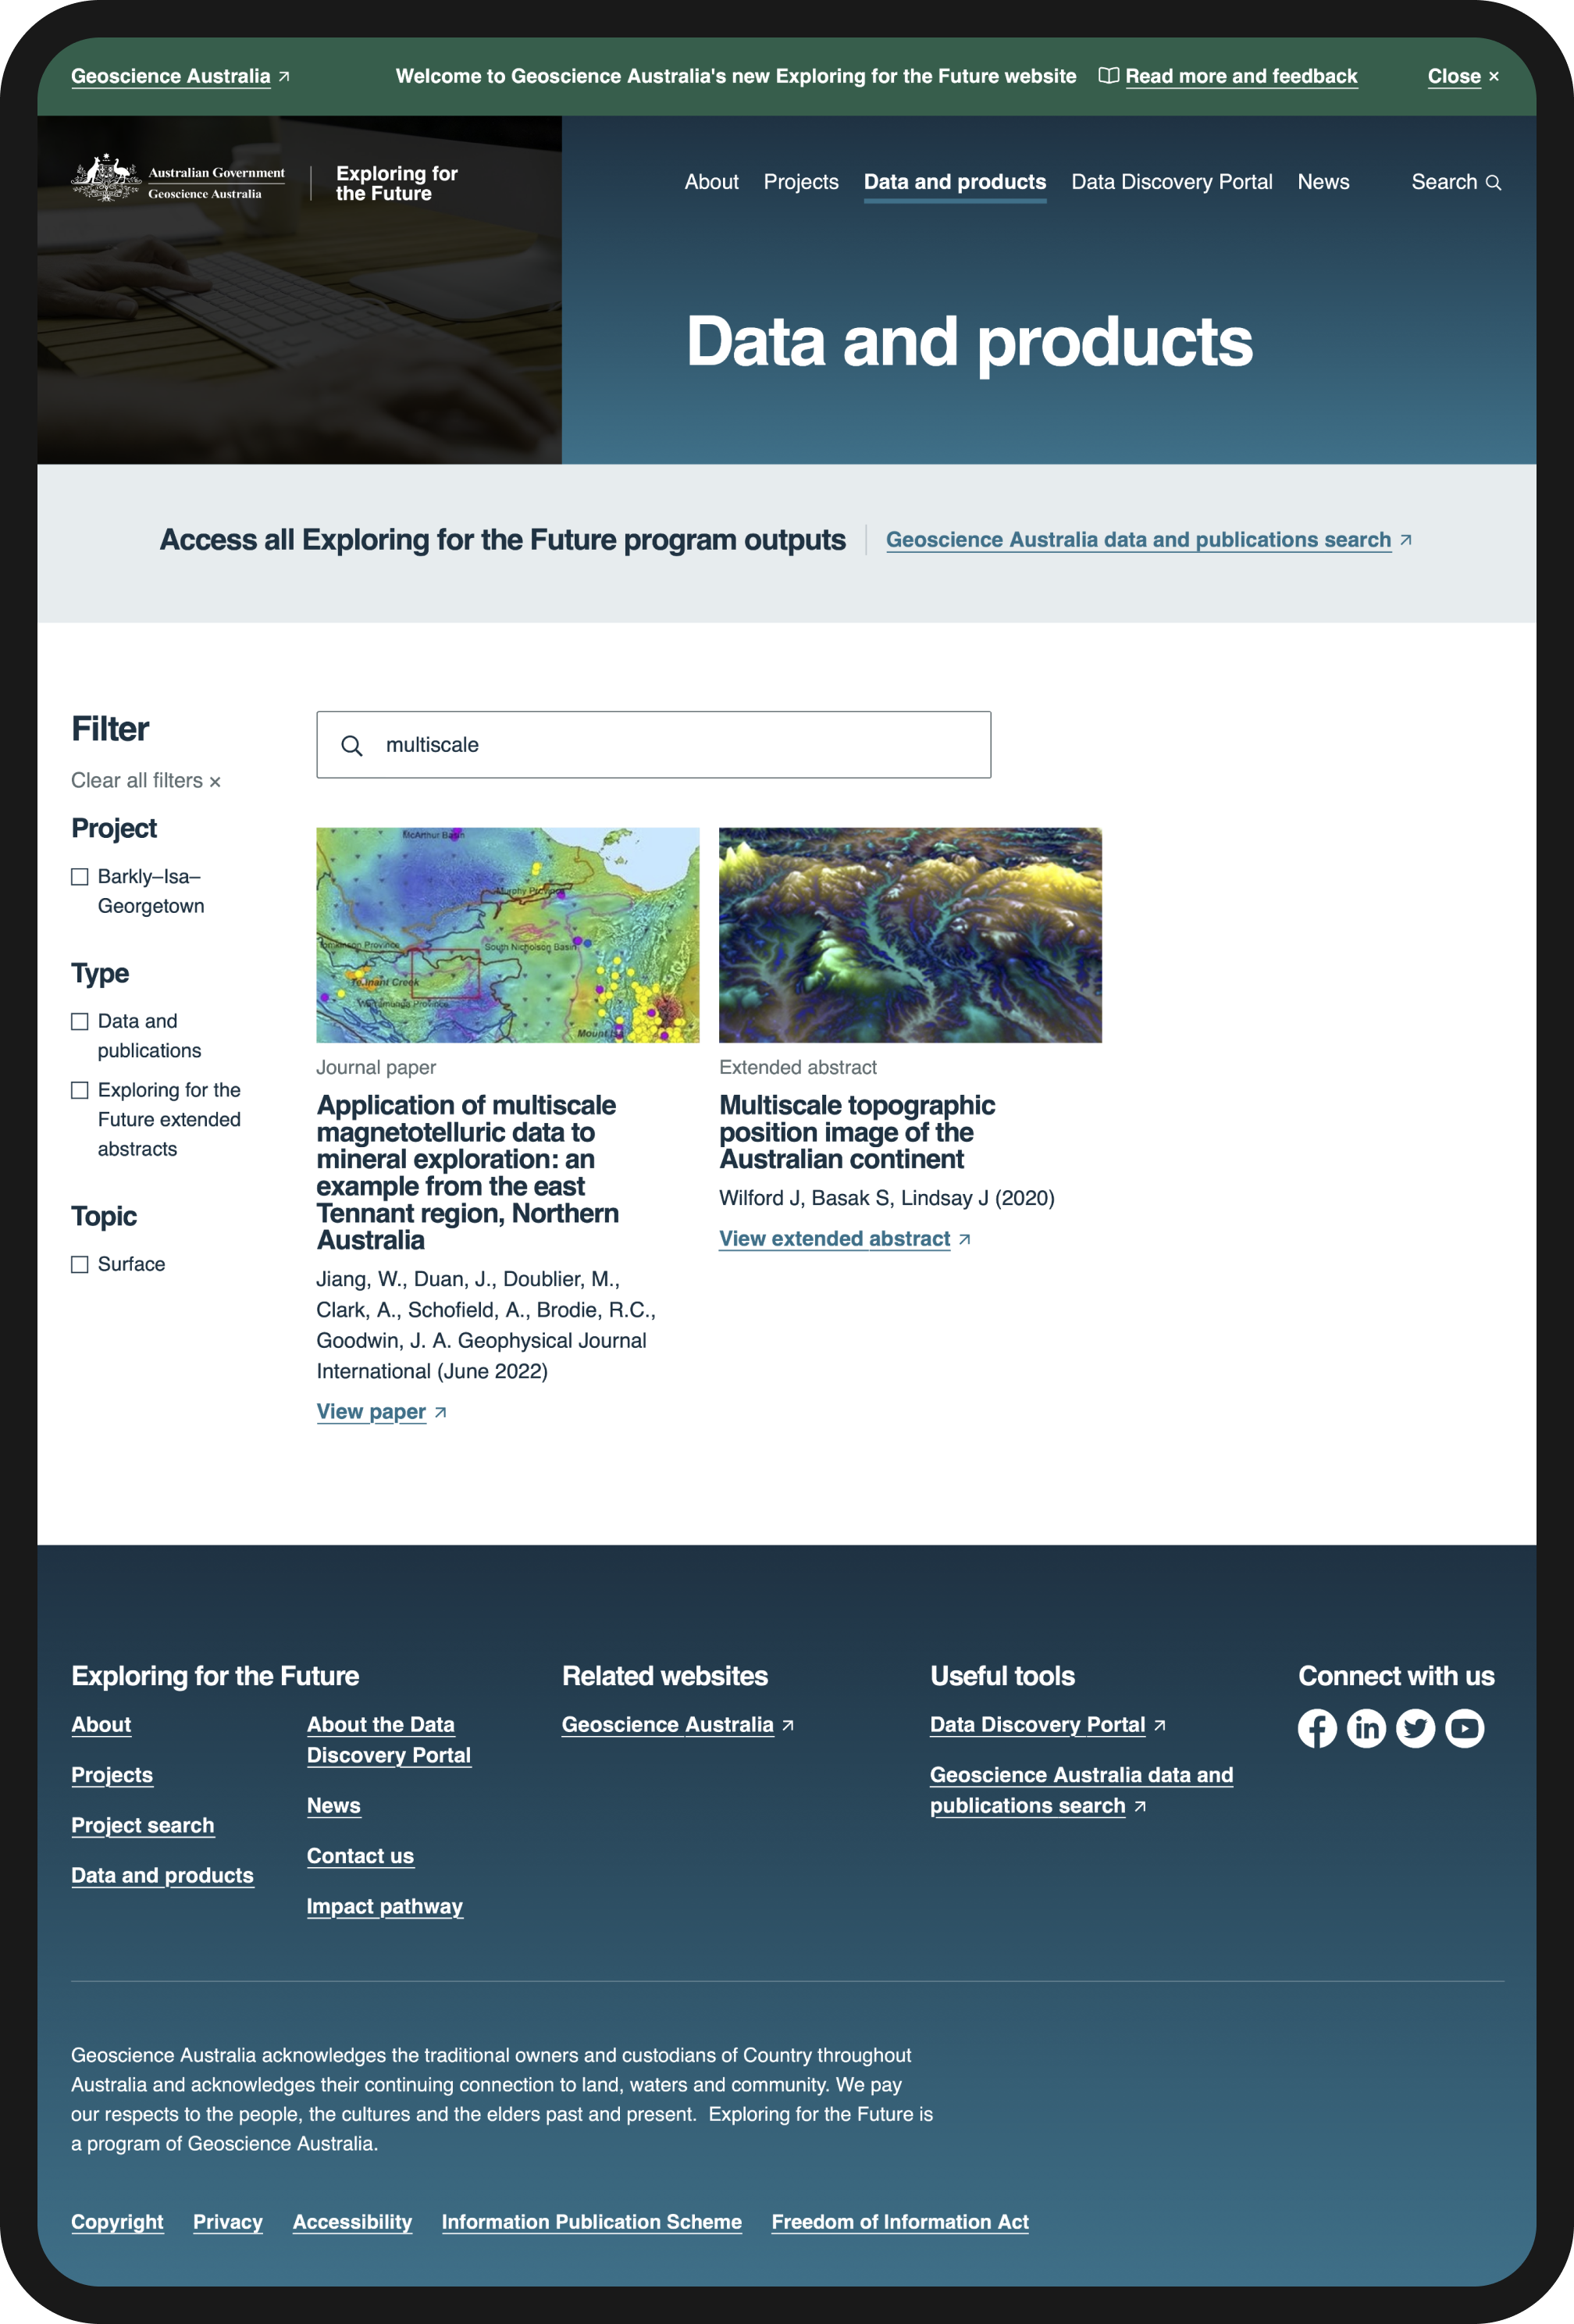 Image of Data and products page of Geoscience Australia website, showing search result for 